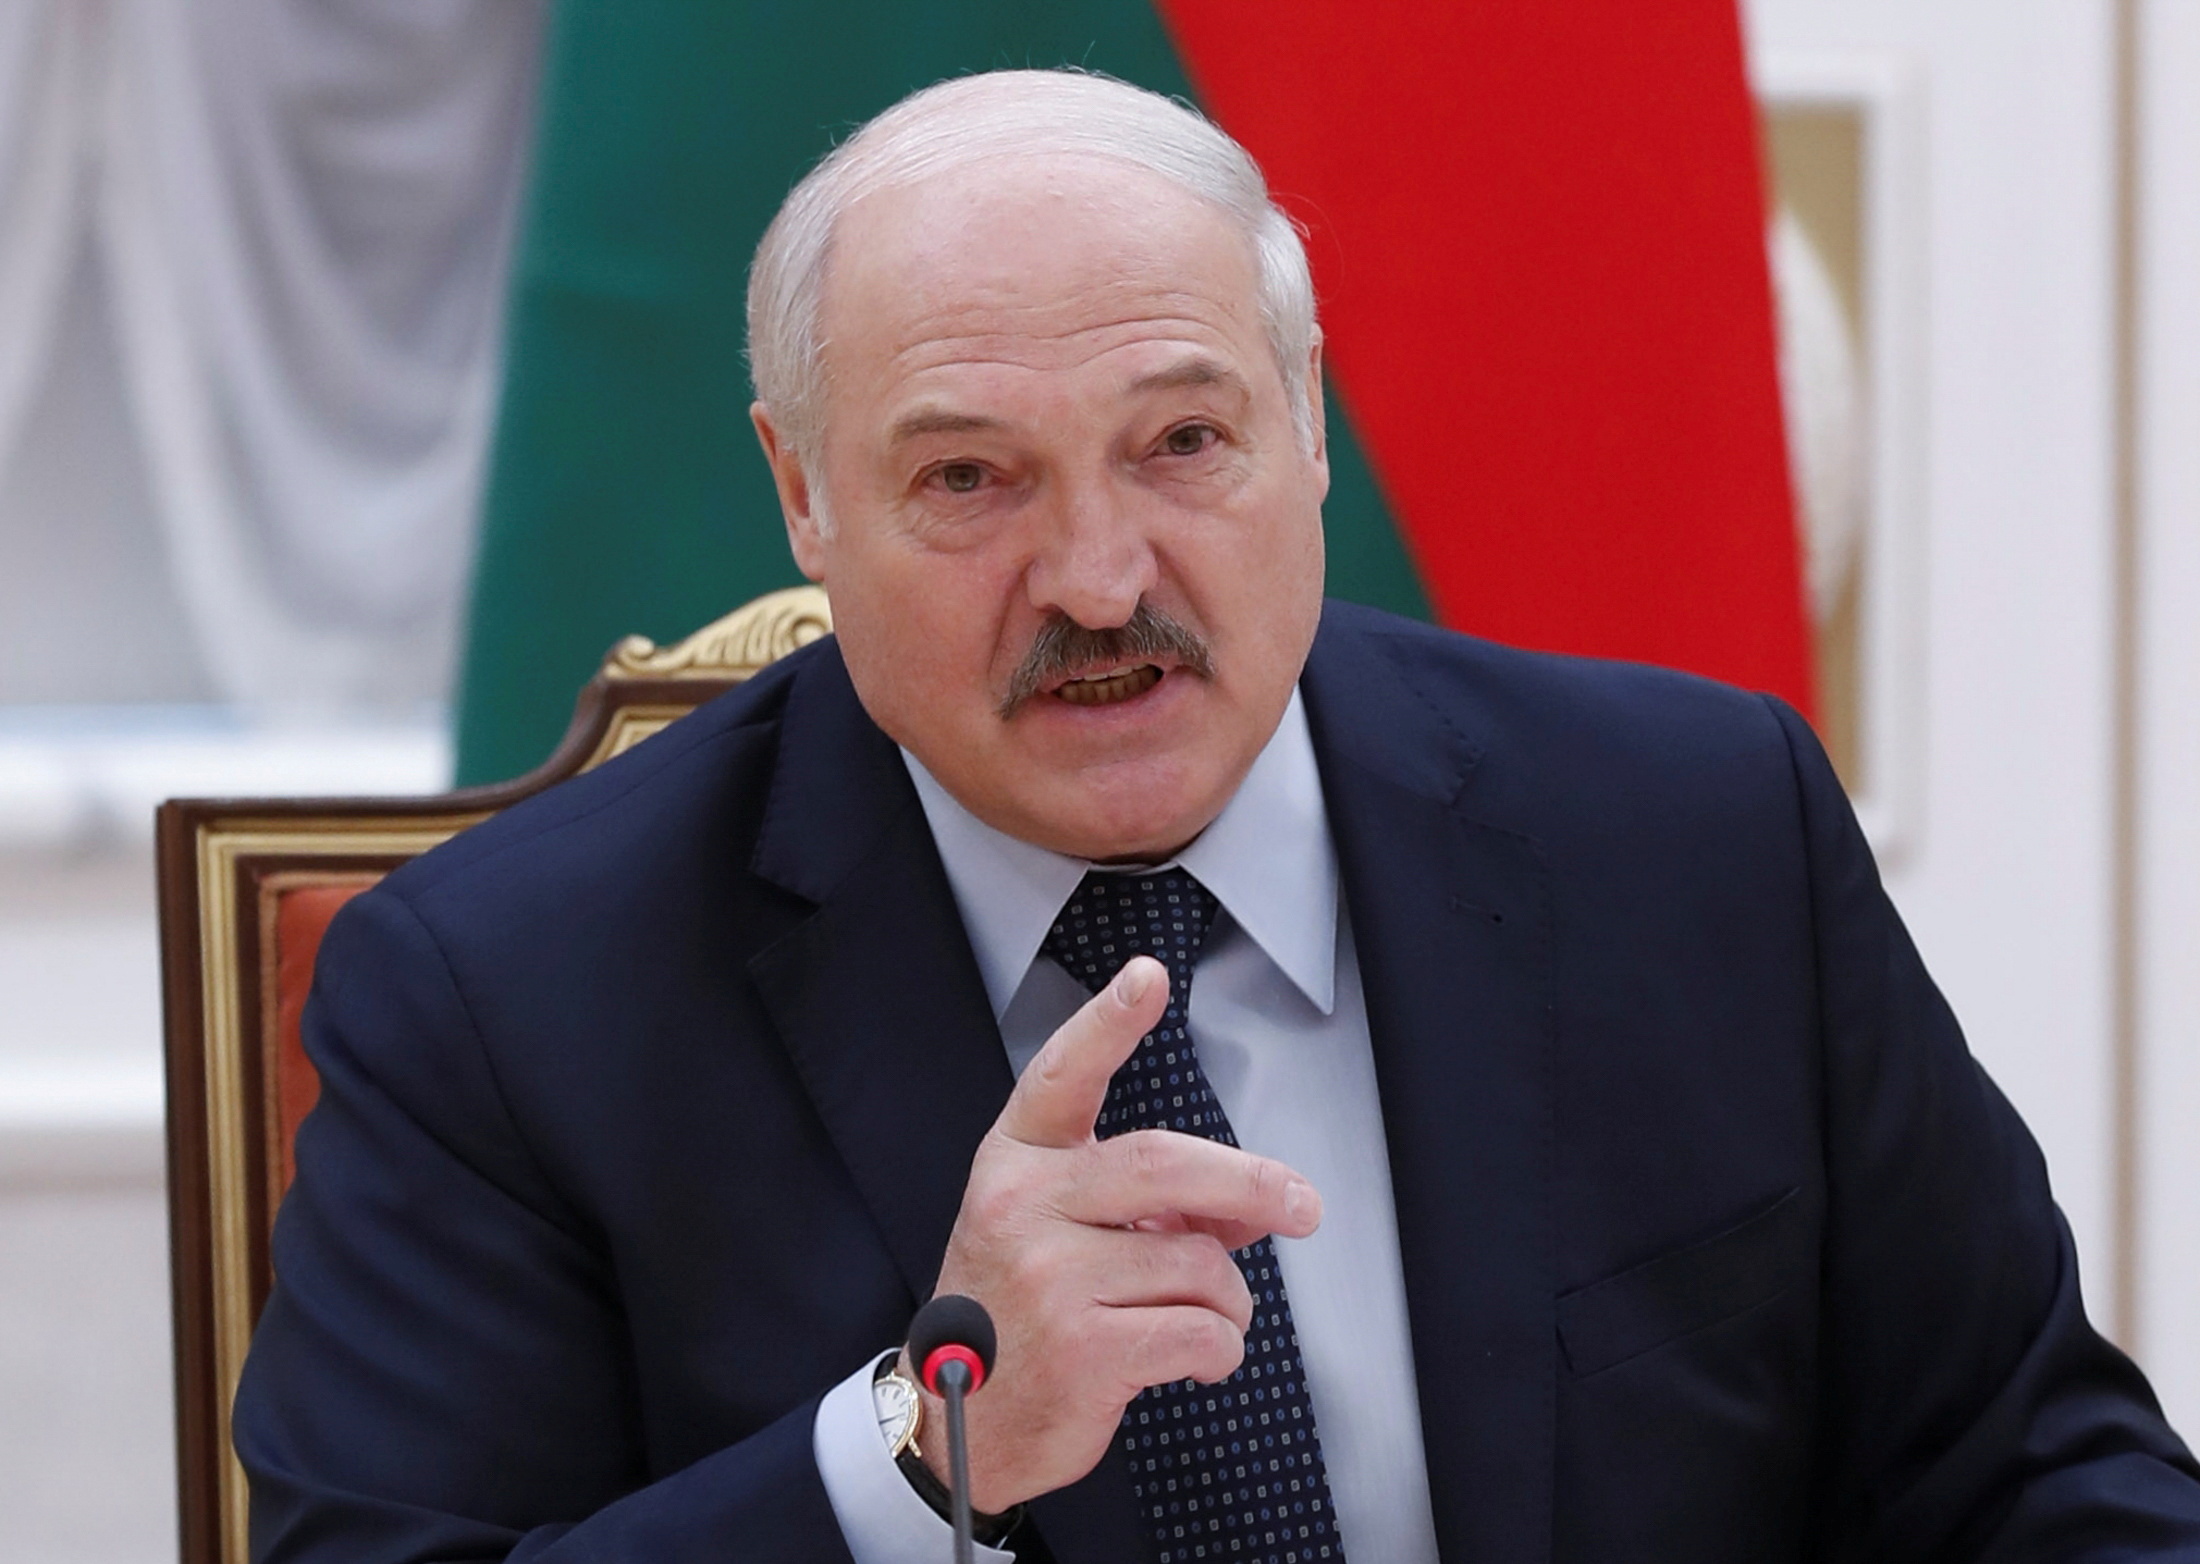 Belarusian President Alexander Lukashenko speaks at CIS Heads of Government Council in Minsk